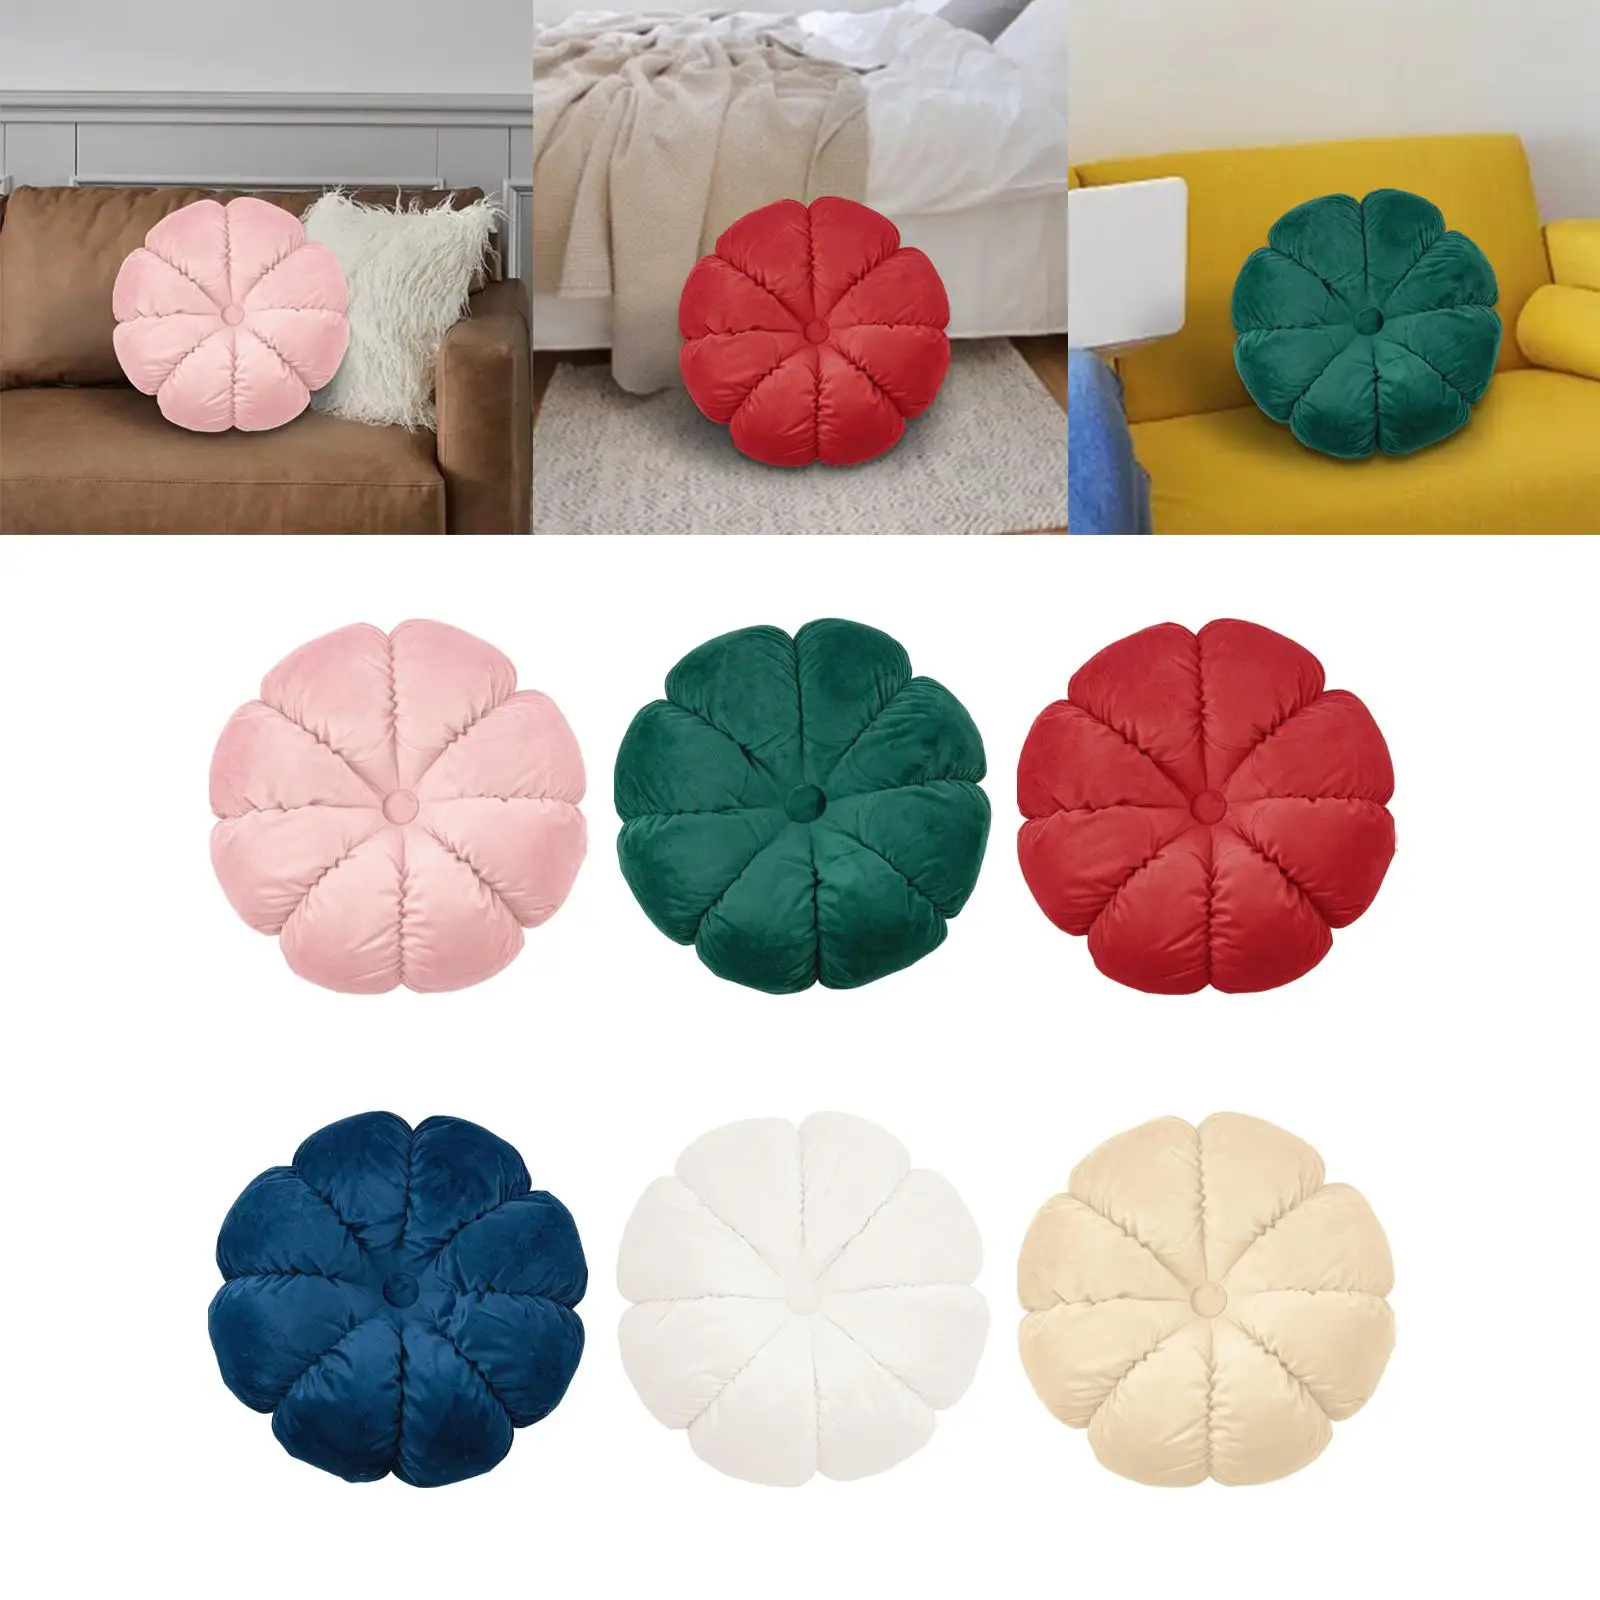 Round Throw Pillow Floor Seating Cushion for Living Room Home Dining Room